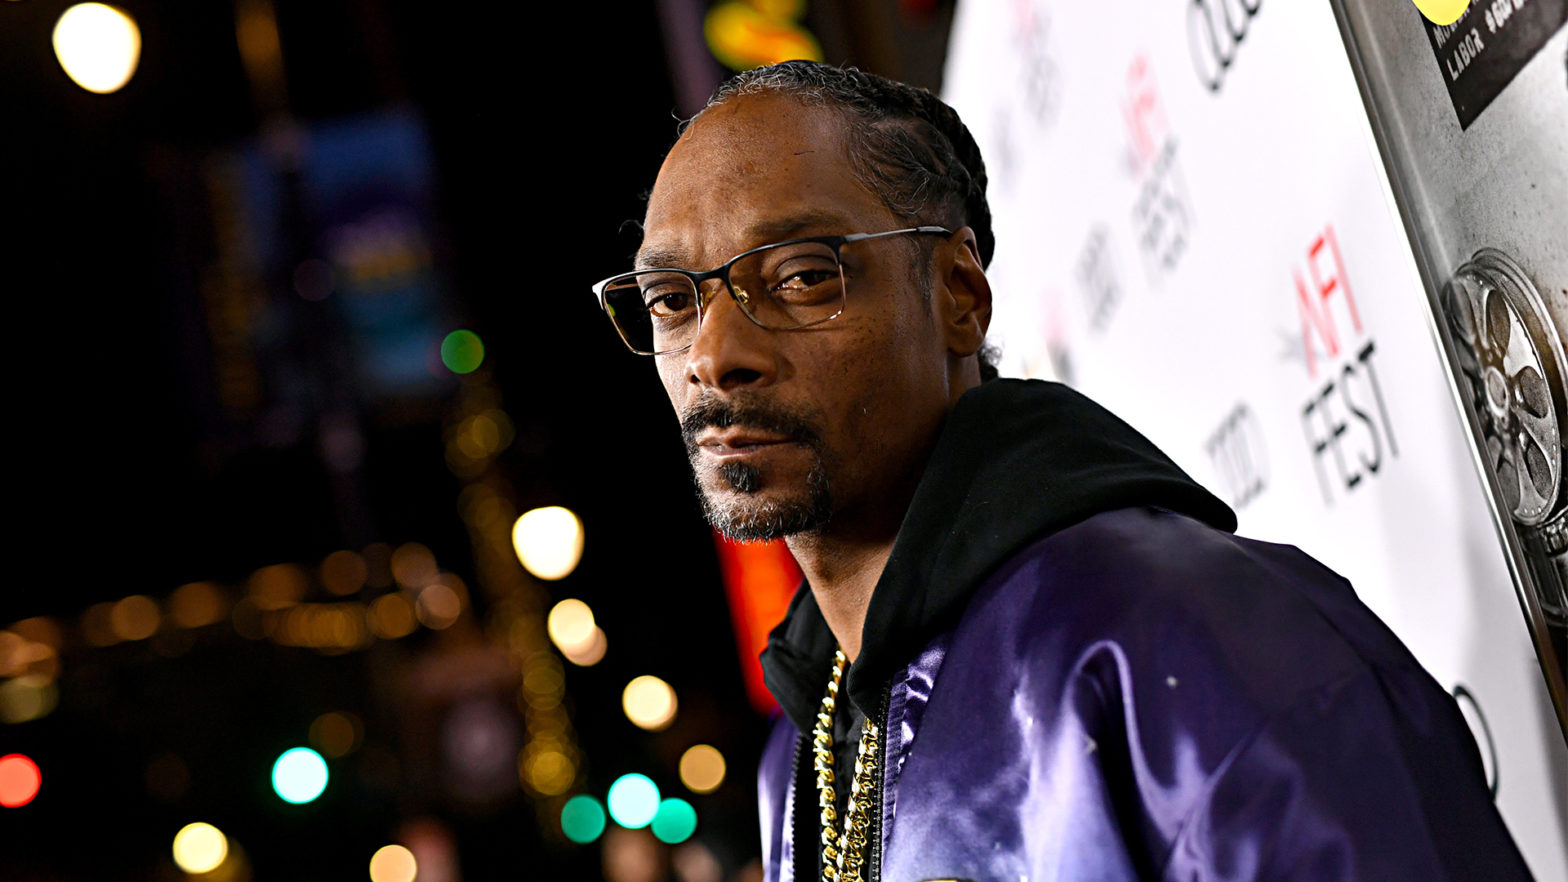 Snoop Dogg Resigns From Esports Company FaZe Clan As Stake Reportedly 'Plummets' By $7M